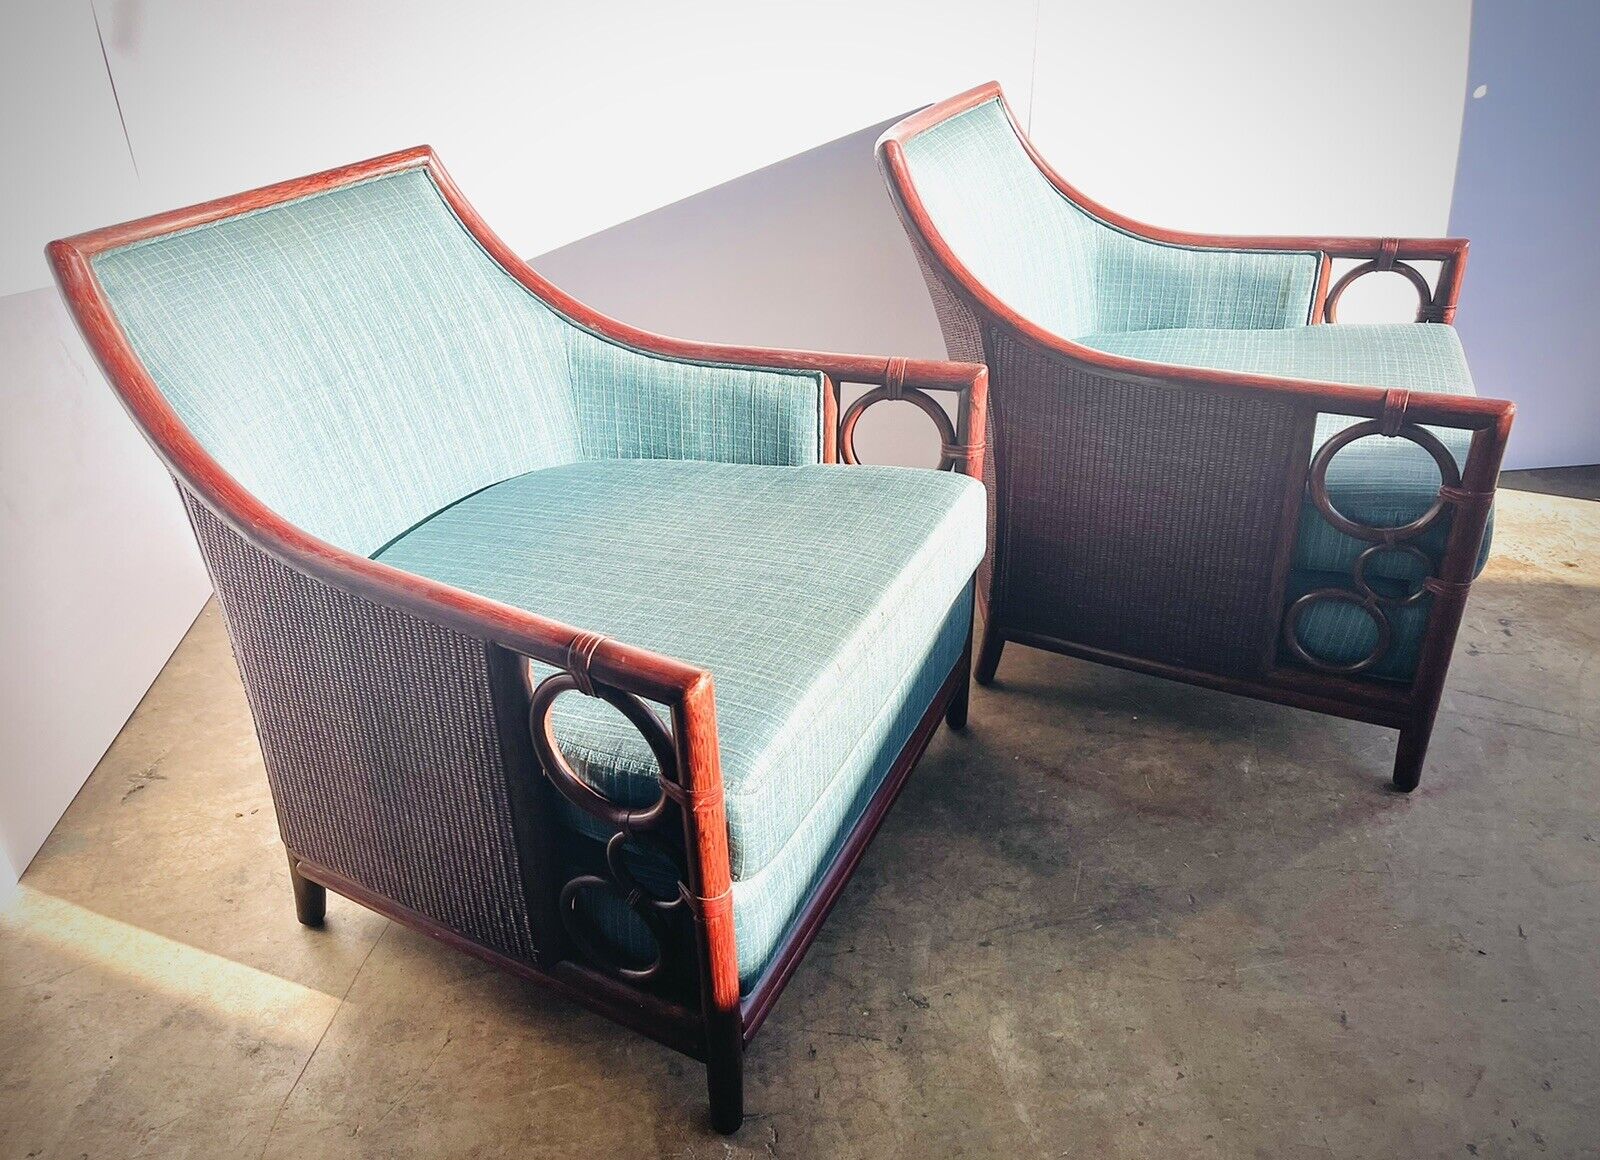 REMARKABLE PAIR OF MID CENTURY MODERN RATTAN LOUNGE CHAIRS BY McGUIRE